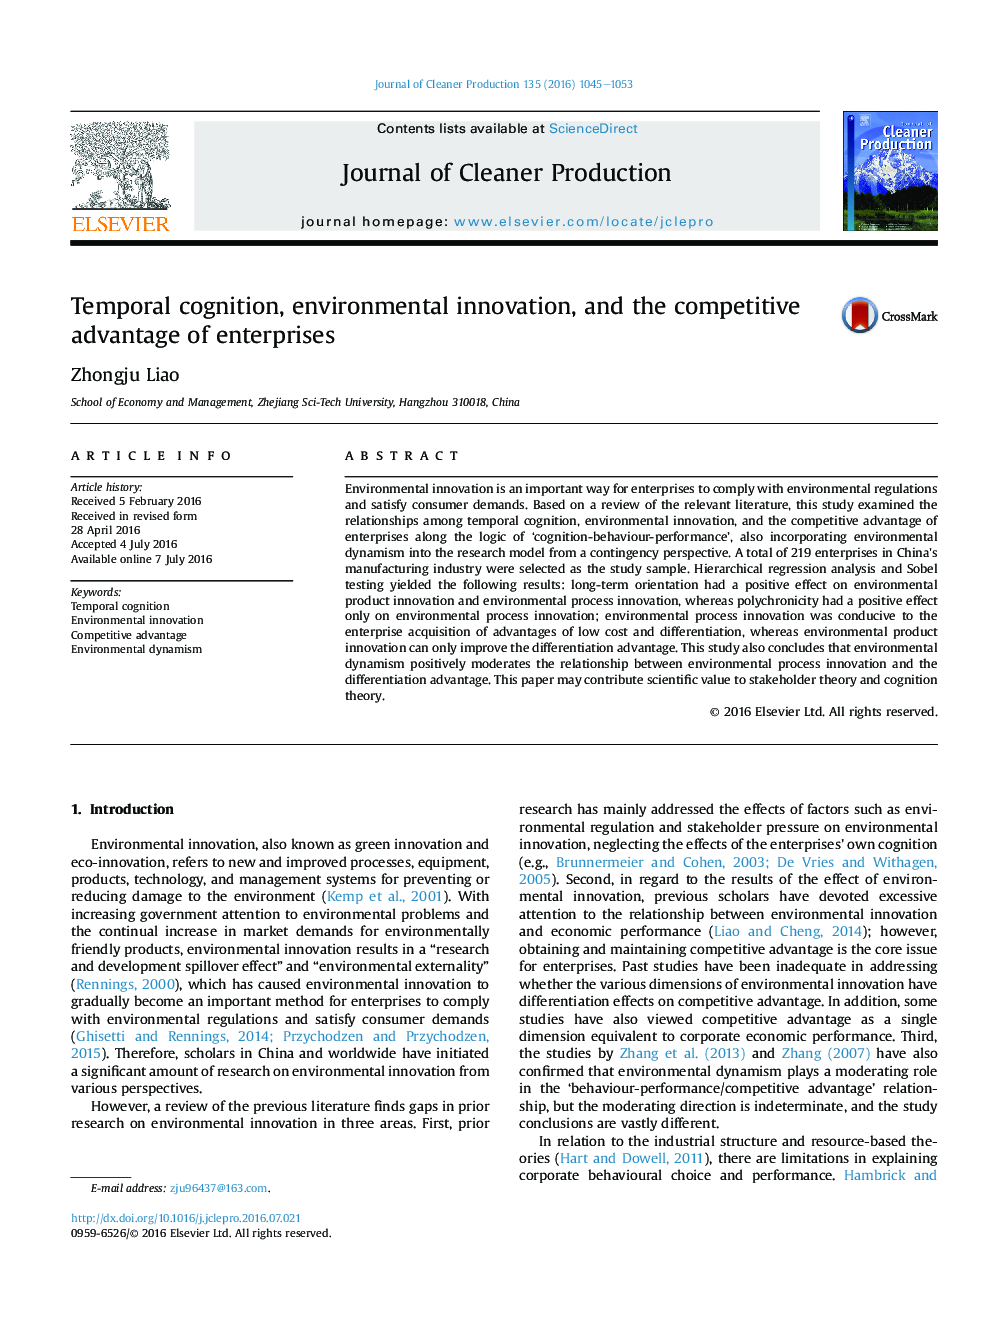 Temporal cognition, environmental innovation, and the competitive advantage of enterprises